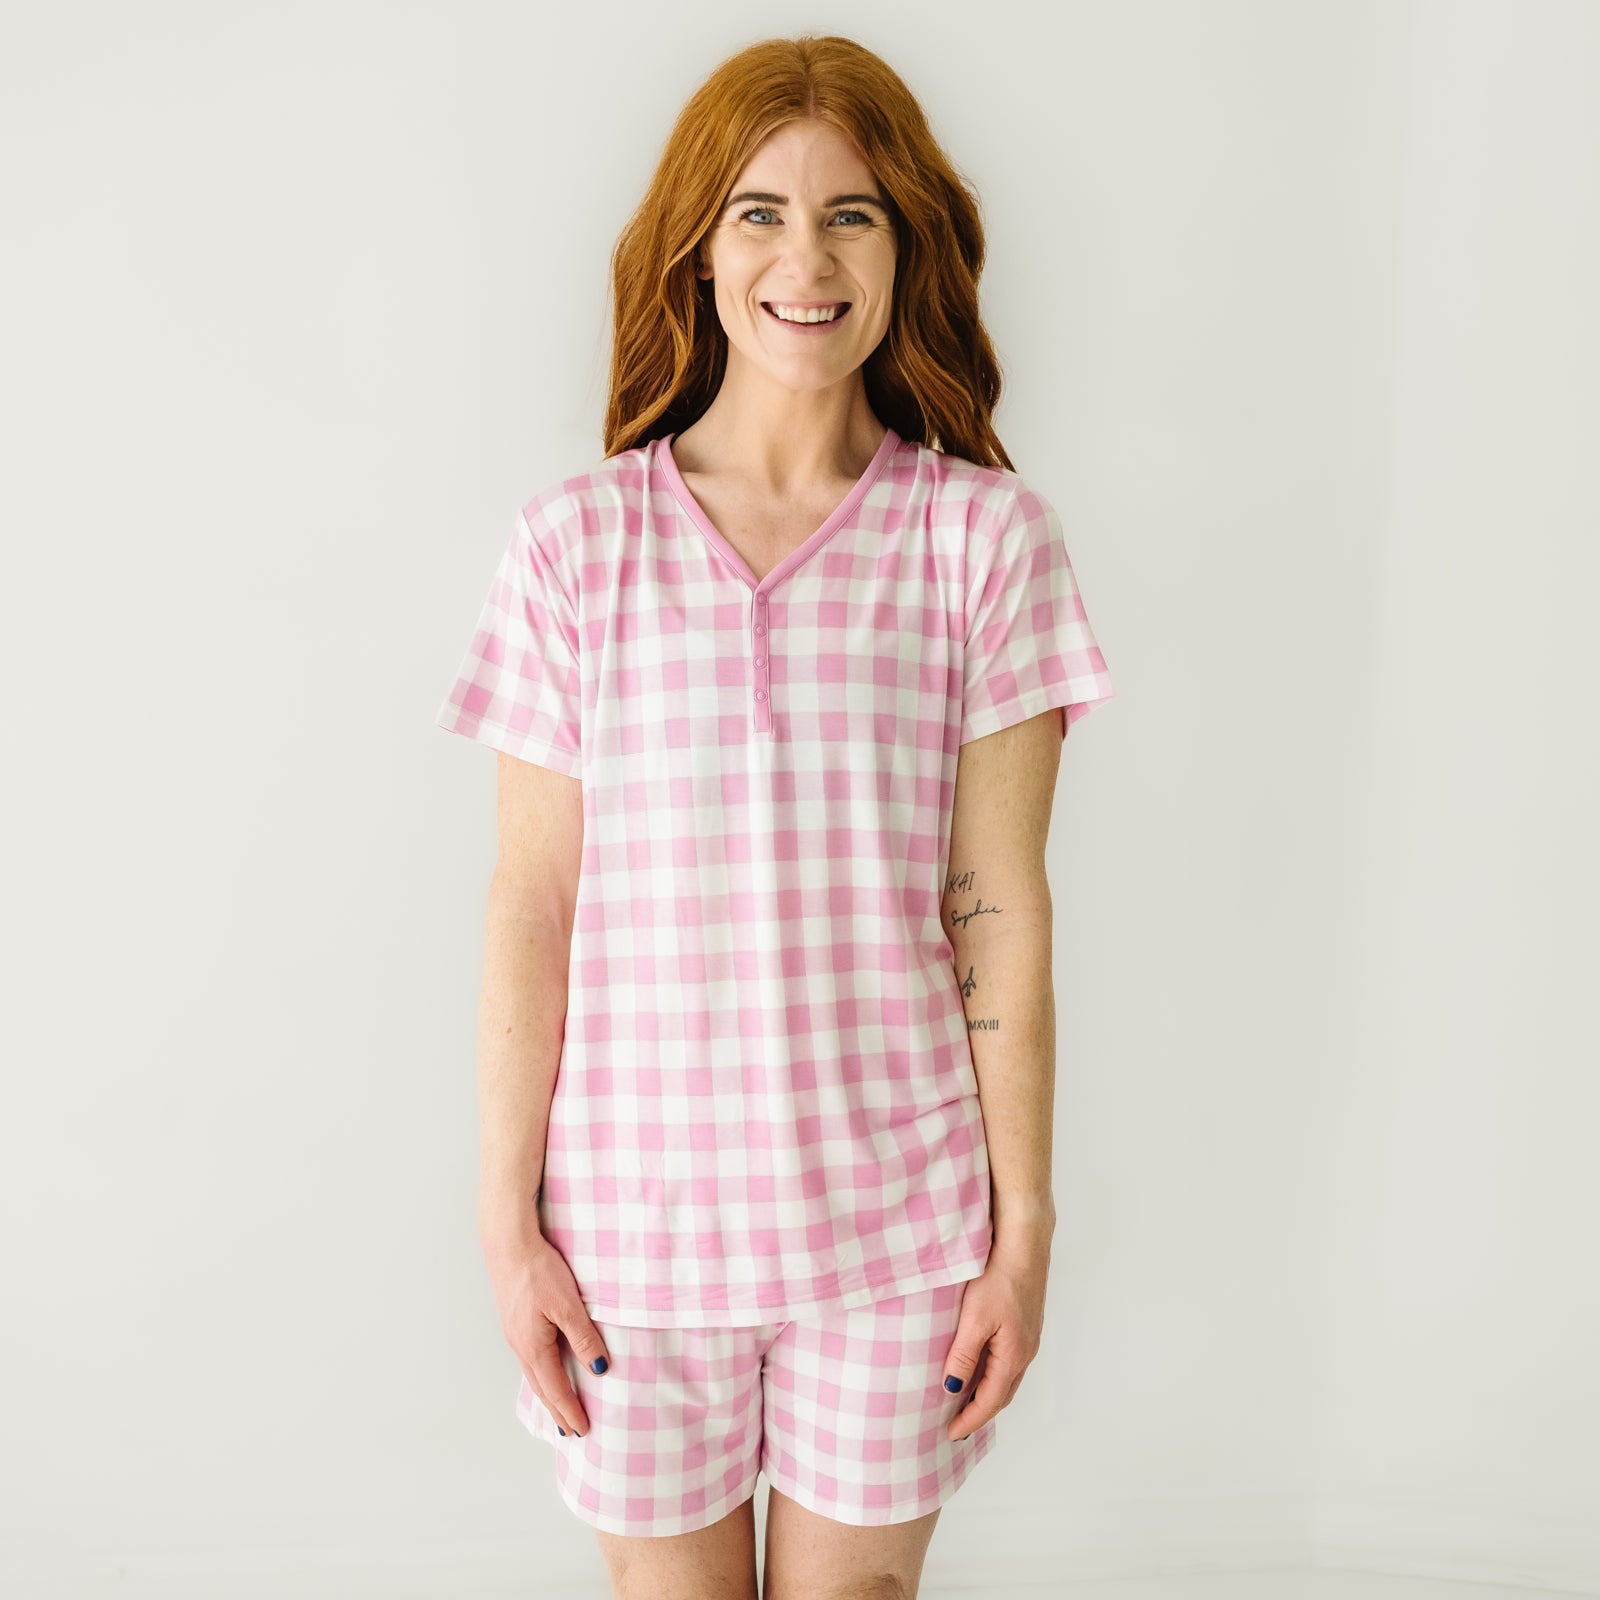 Womens Sleep Shorts, Gingham Boxers, Lightweight Cotton, Sleepwear, Size  Small, Gift for Her. 